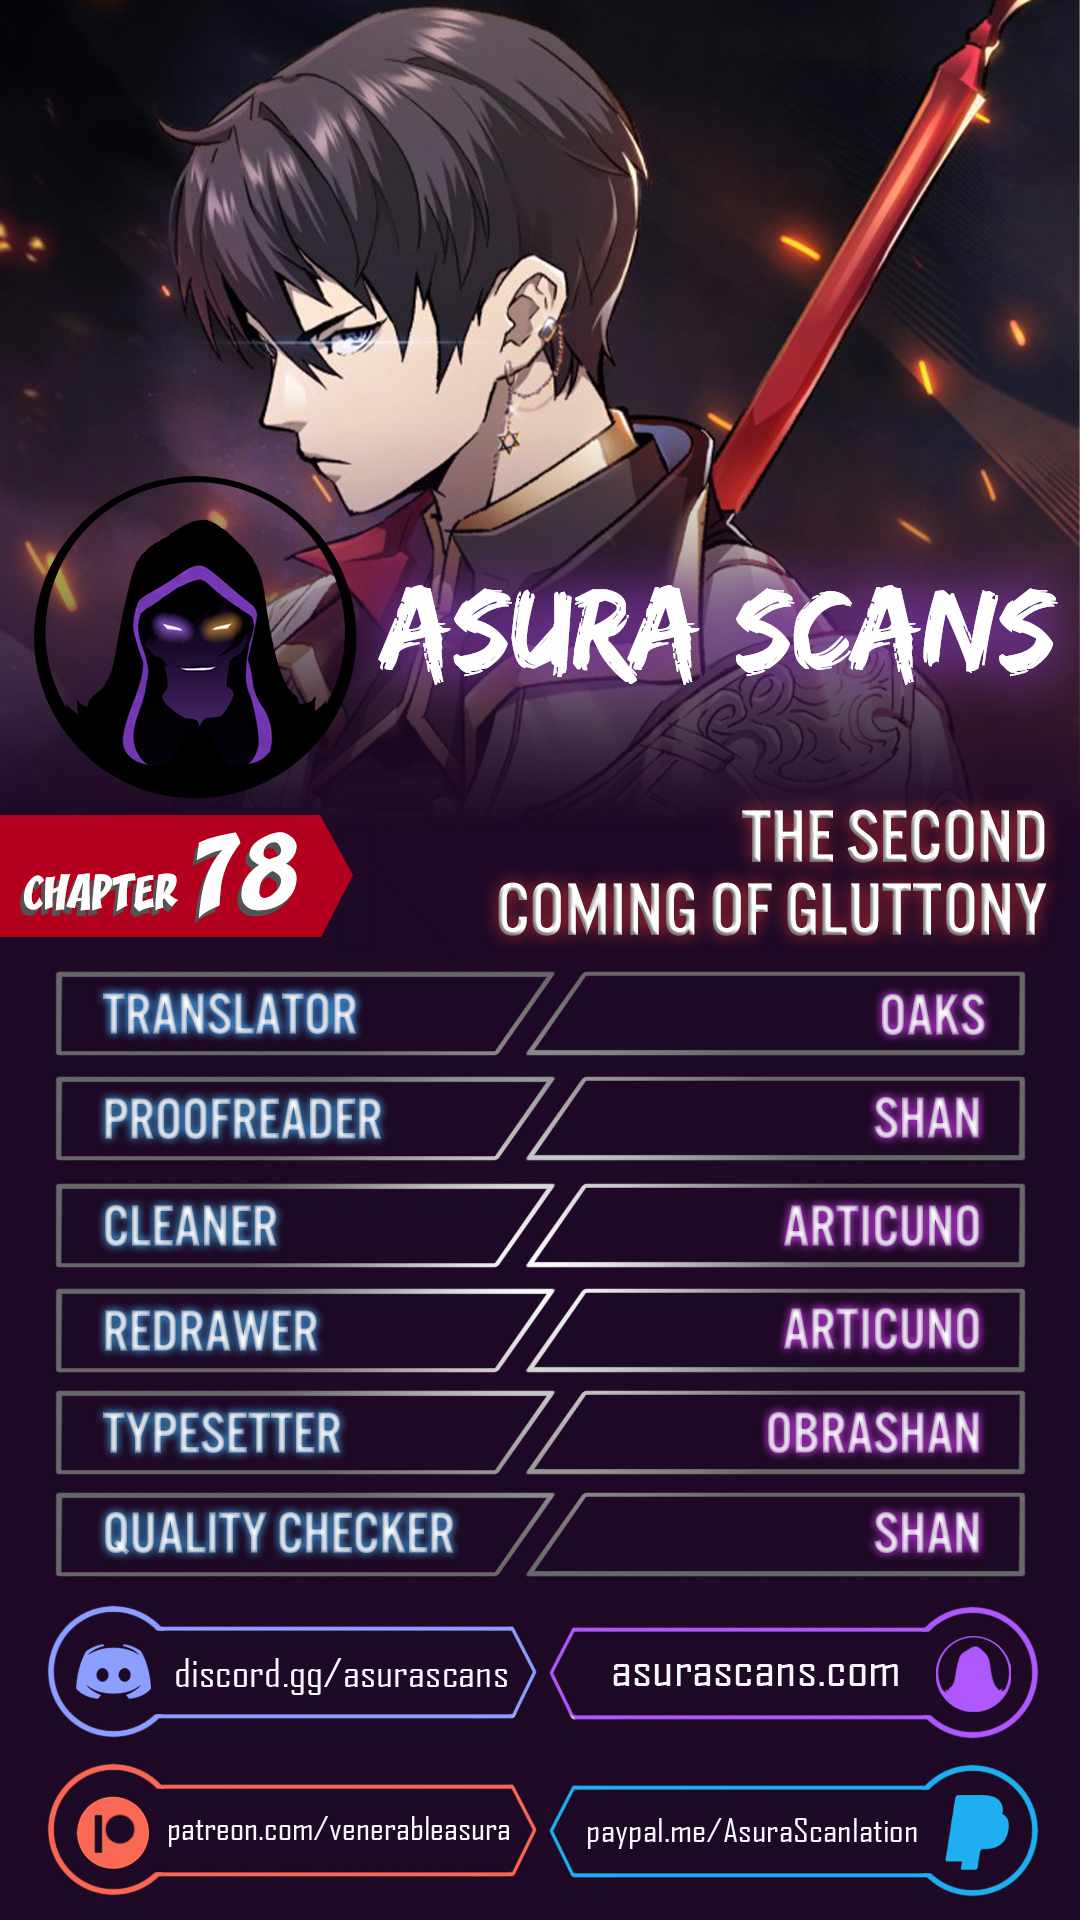 The Second Coming of Gluttony Chapter 78, The Second Coming of Gluttony 78, Read The Second Coming of Gluttony Chapter 78, The Second Coming of Gluttony Chapter 78 Manga, The Second Coming of Gluttony Chapter 78 english, The Second Coming of Gluttony Chapter 78 raw manga, The Second Coming of Gluttony Chapter 78 online, The Second Coming of Gluttony Chapter 78 high quality, The Second Coming of Gluttony 78 chapter, The Second Coming of Gluttony Chapter 78 manga scan